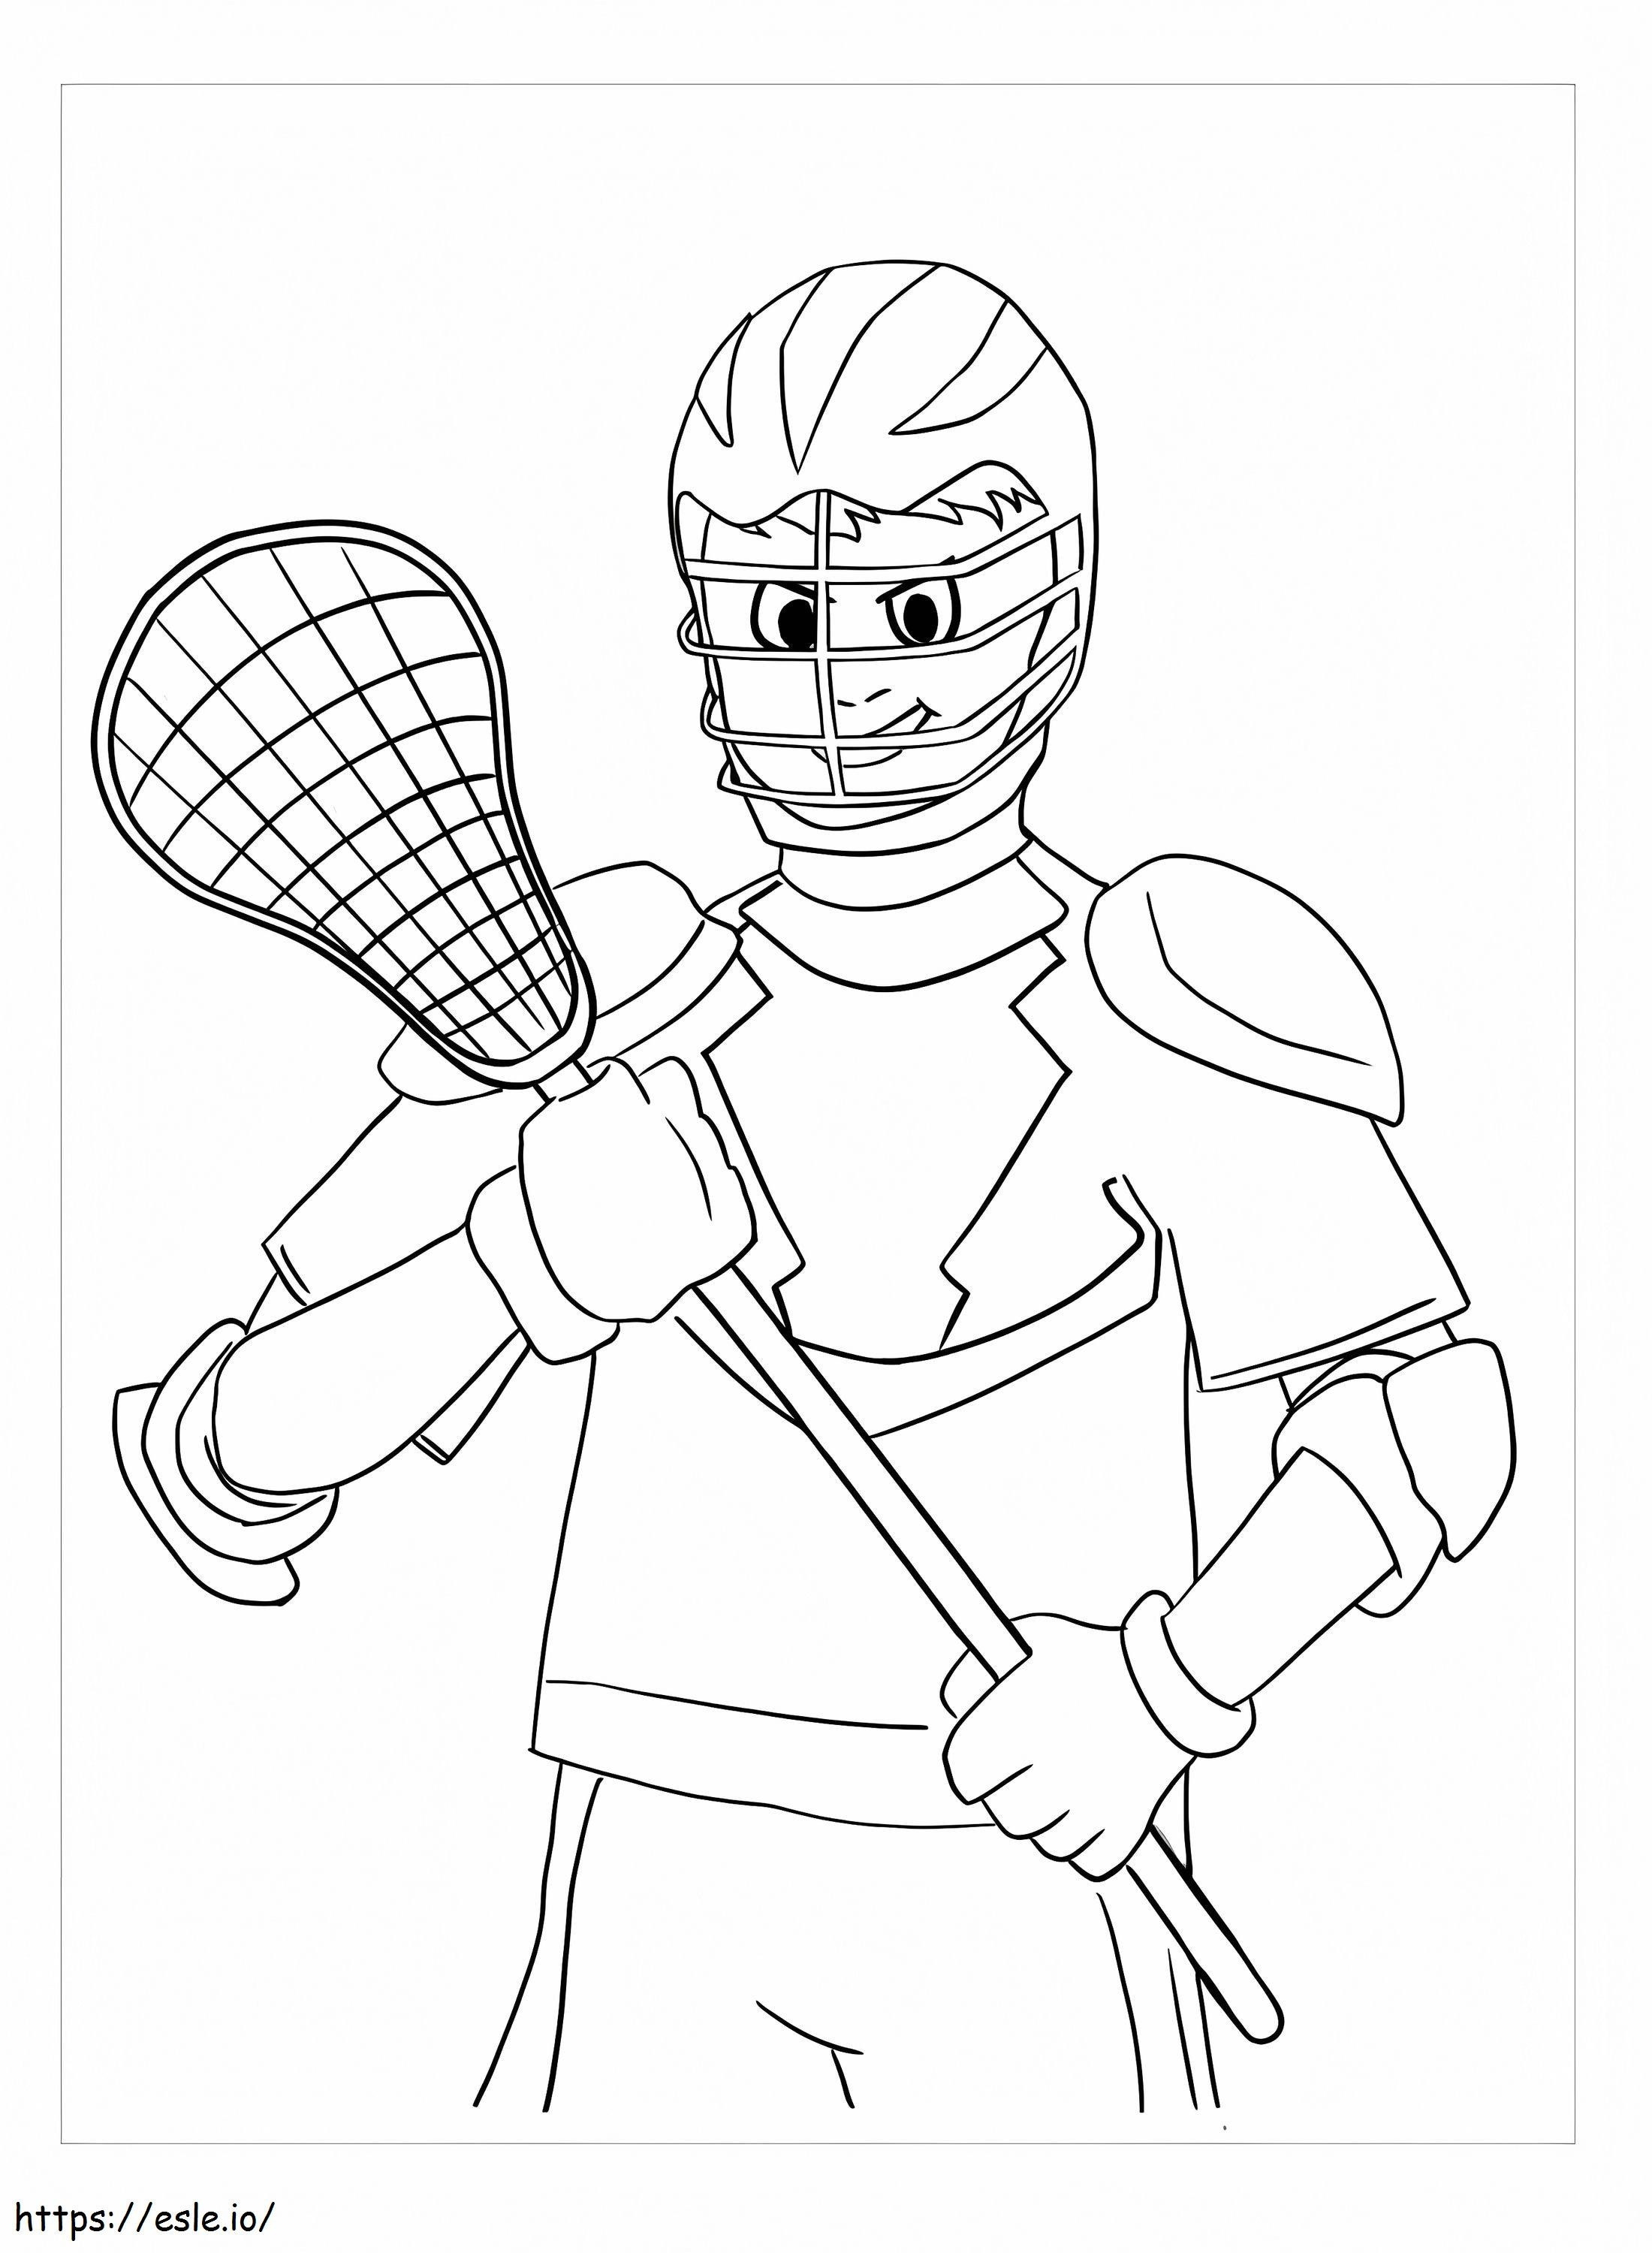 Fun Lacrosse Player coloring page